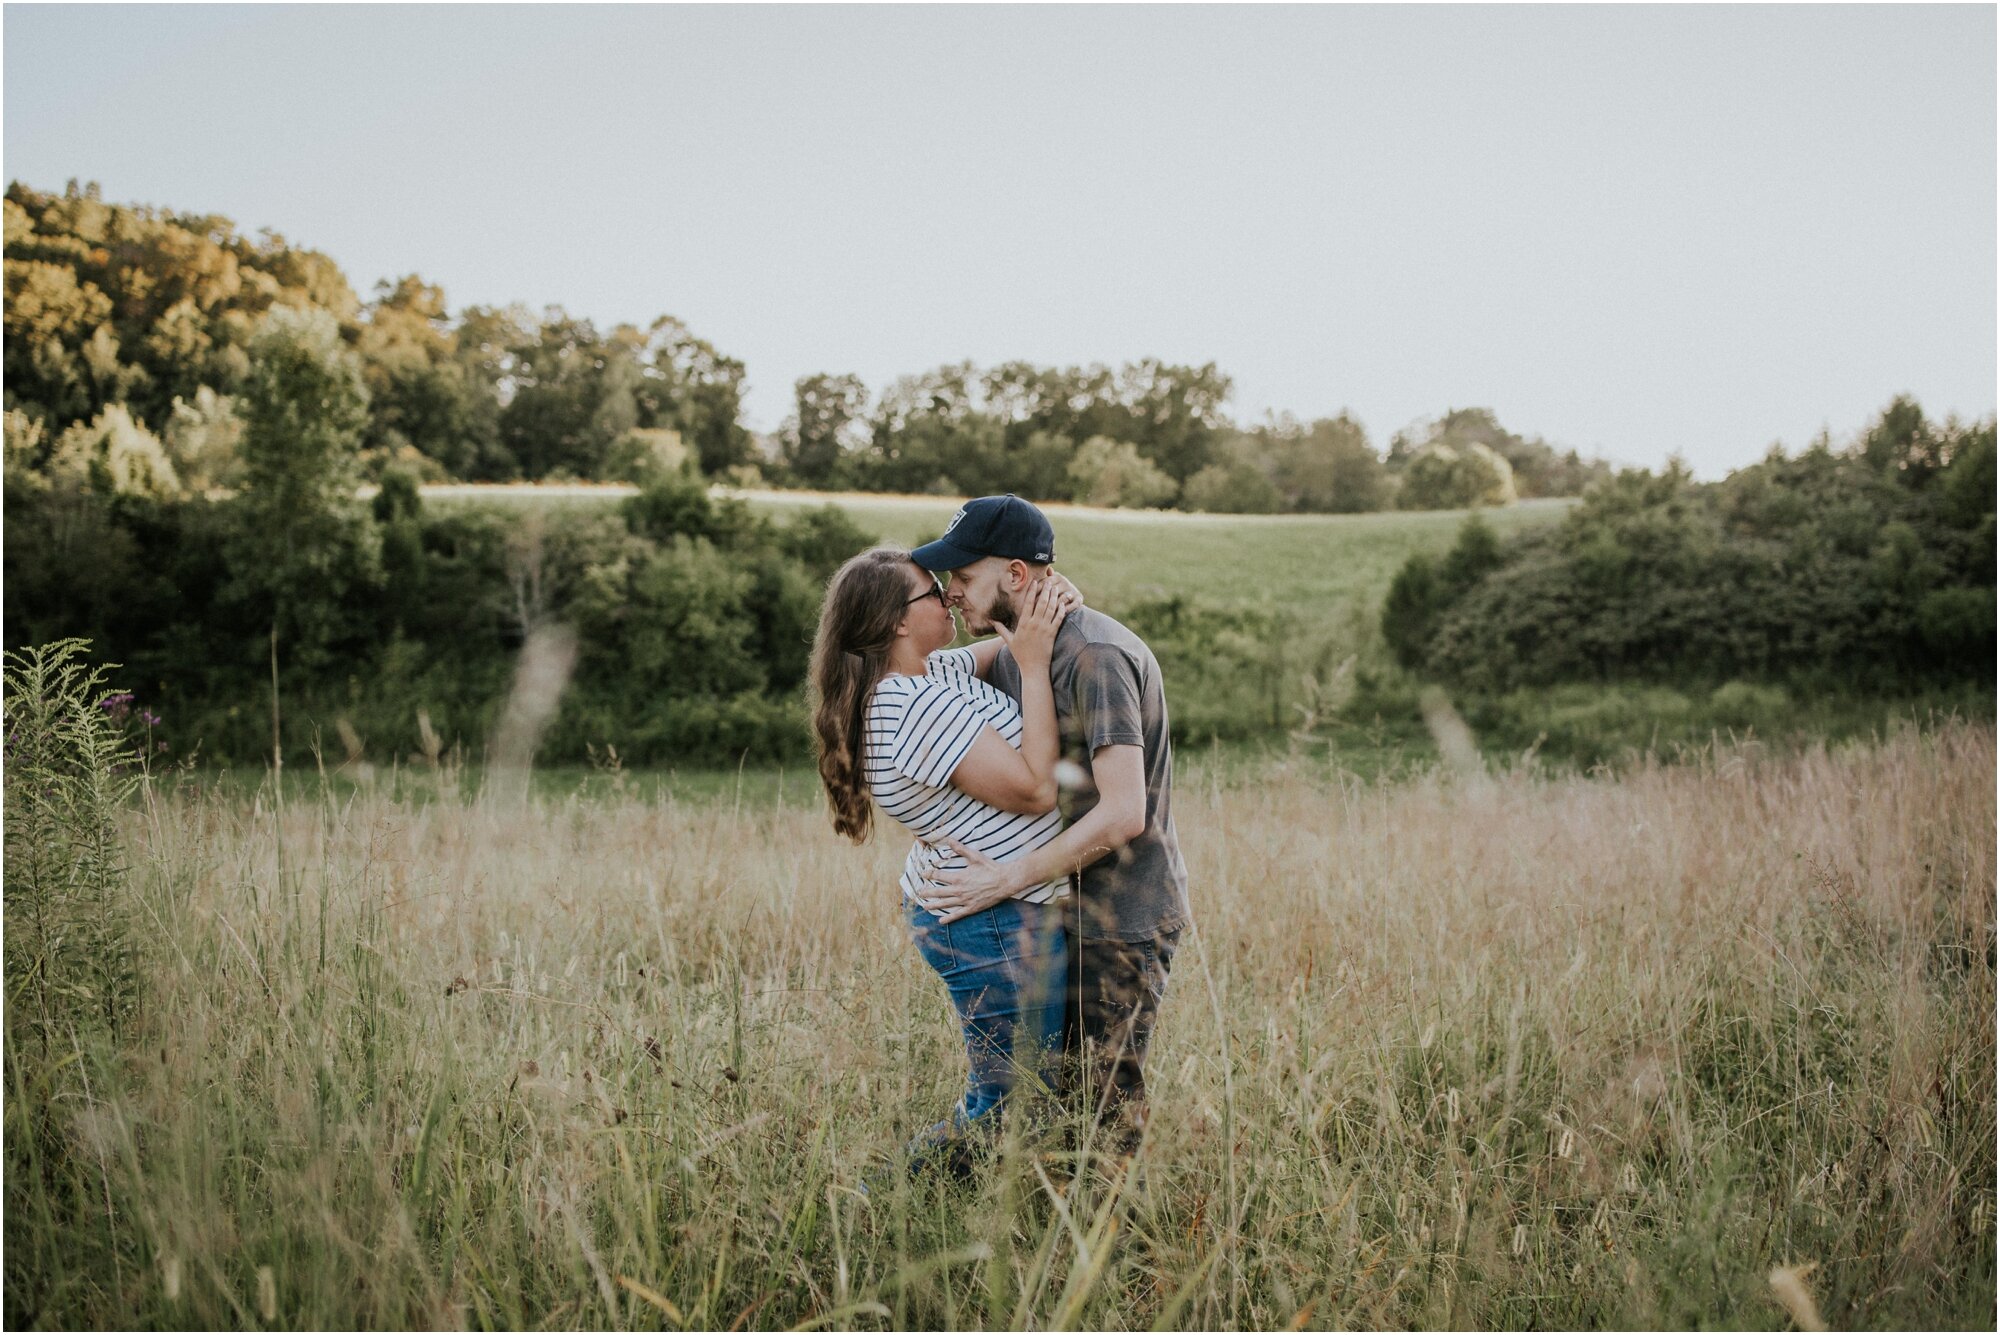 kingsport-tennessee-backyard-pond-bays-mountain-summer-engagement-session_0020.jpg